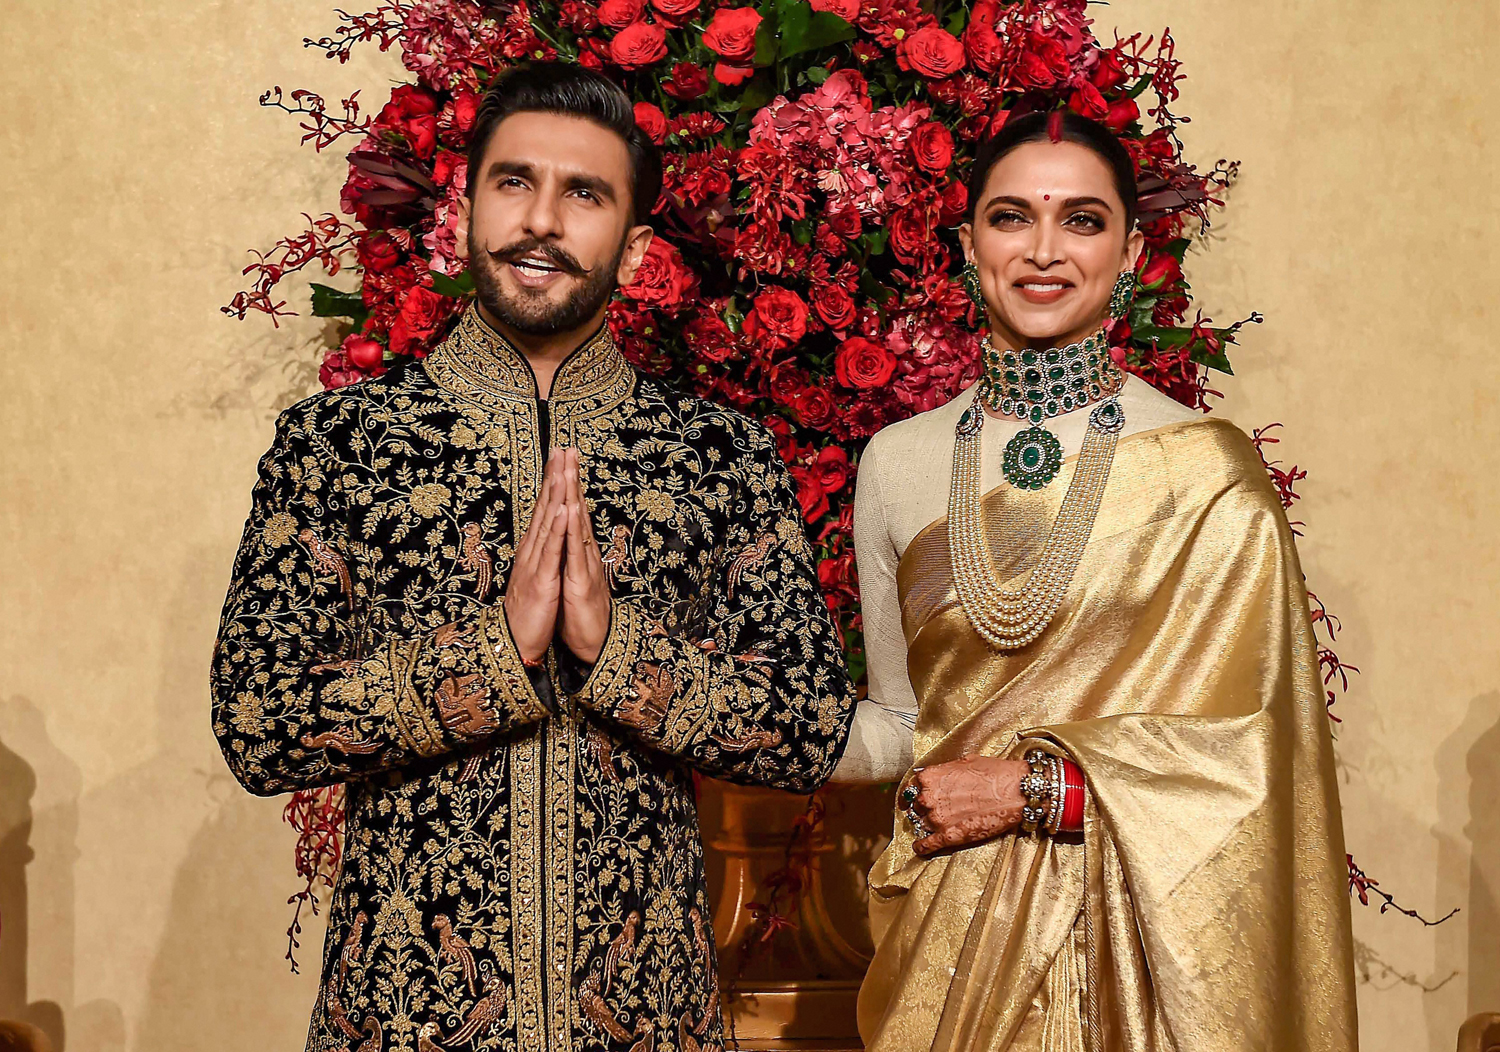 Newly-wed Bollywood couple Ranveer Singh and Deepika Padukone pose for photos during their wedding reception, in Bangalore

